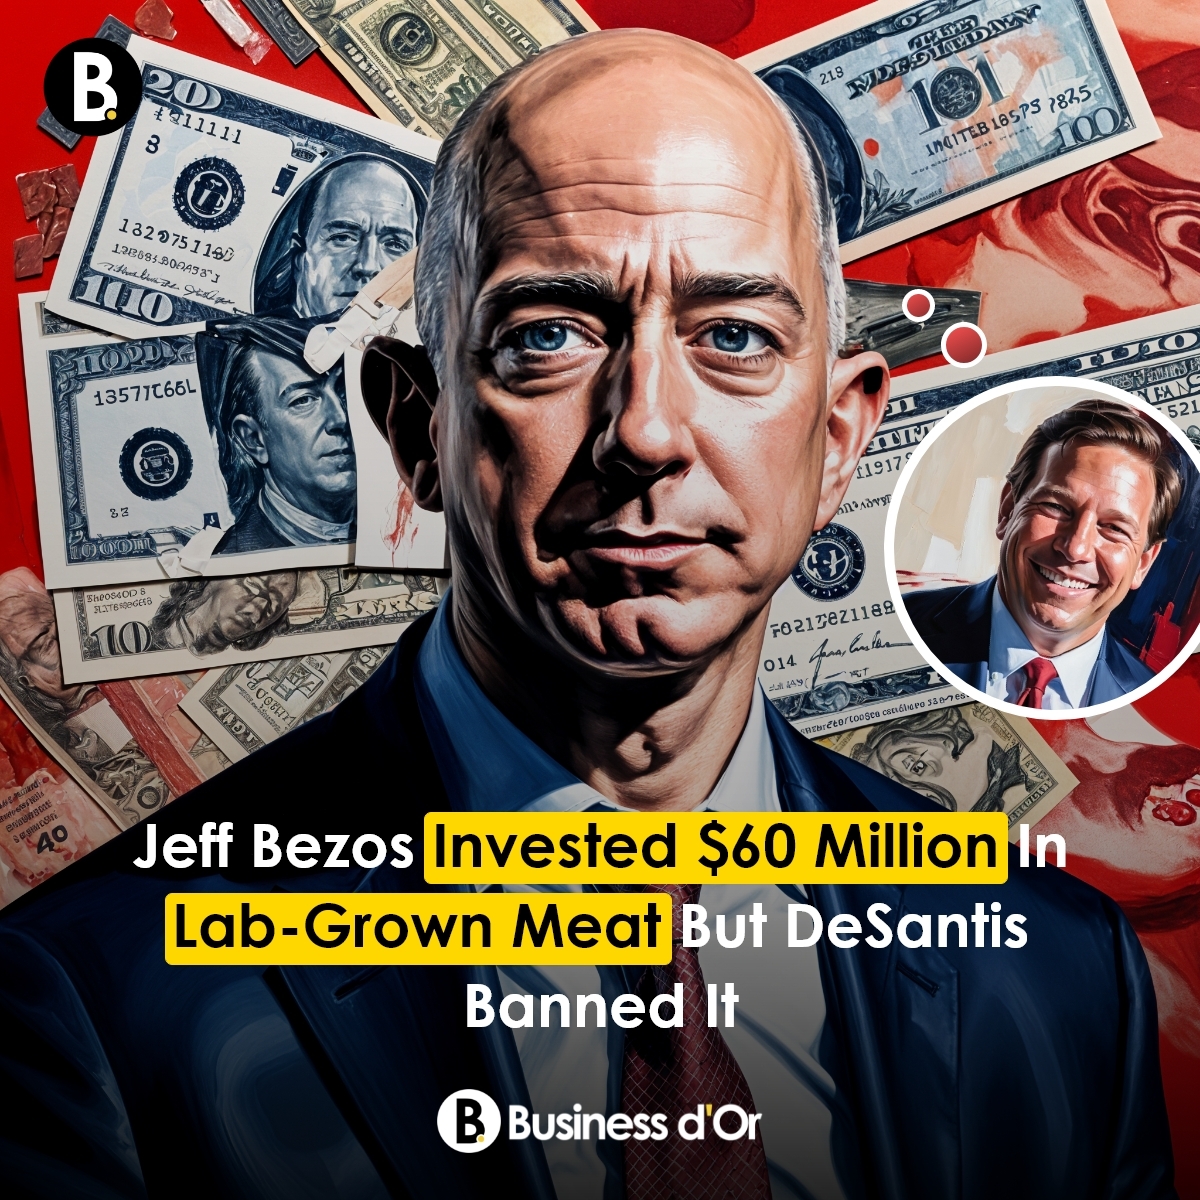 Jeff Bezos and Lauren Sanchez have announced a significant investment in sustainable protein technologies in Florida.

#jeffbezos #labgrownmeat #foodindustry #businessdor